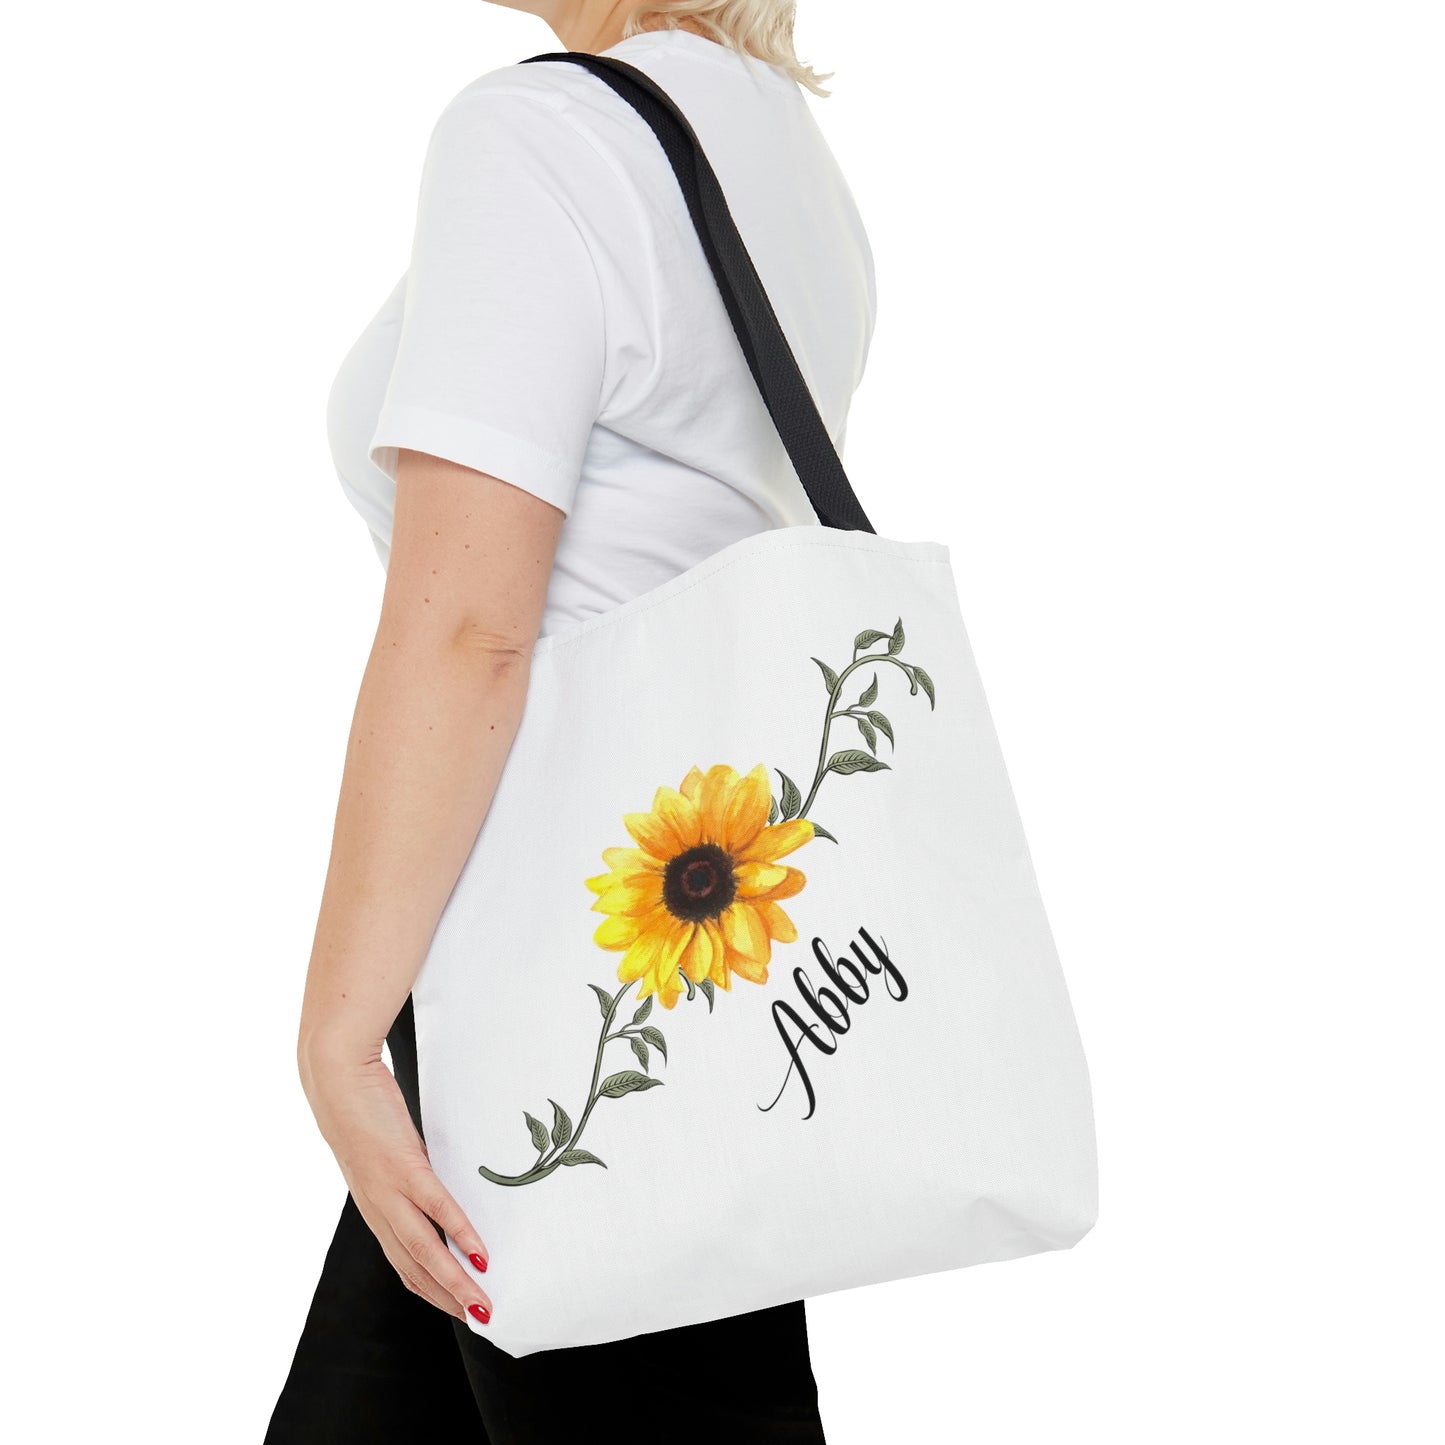 Sunflower Tote Bag, Yellow Floral Bag